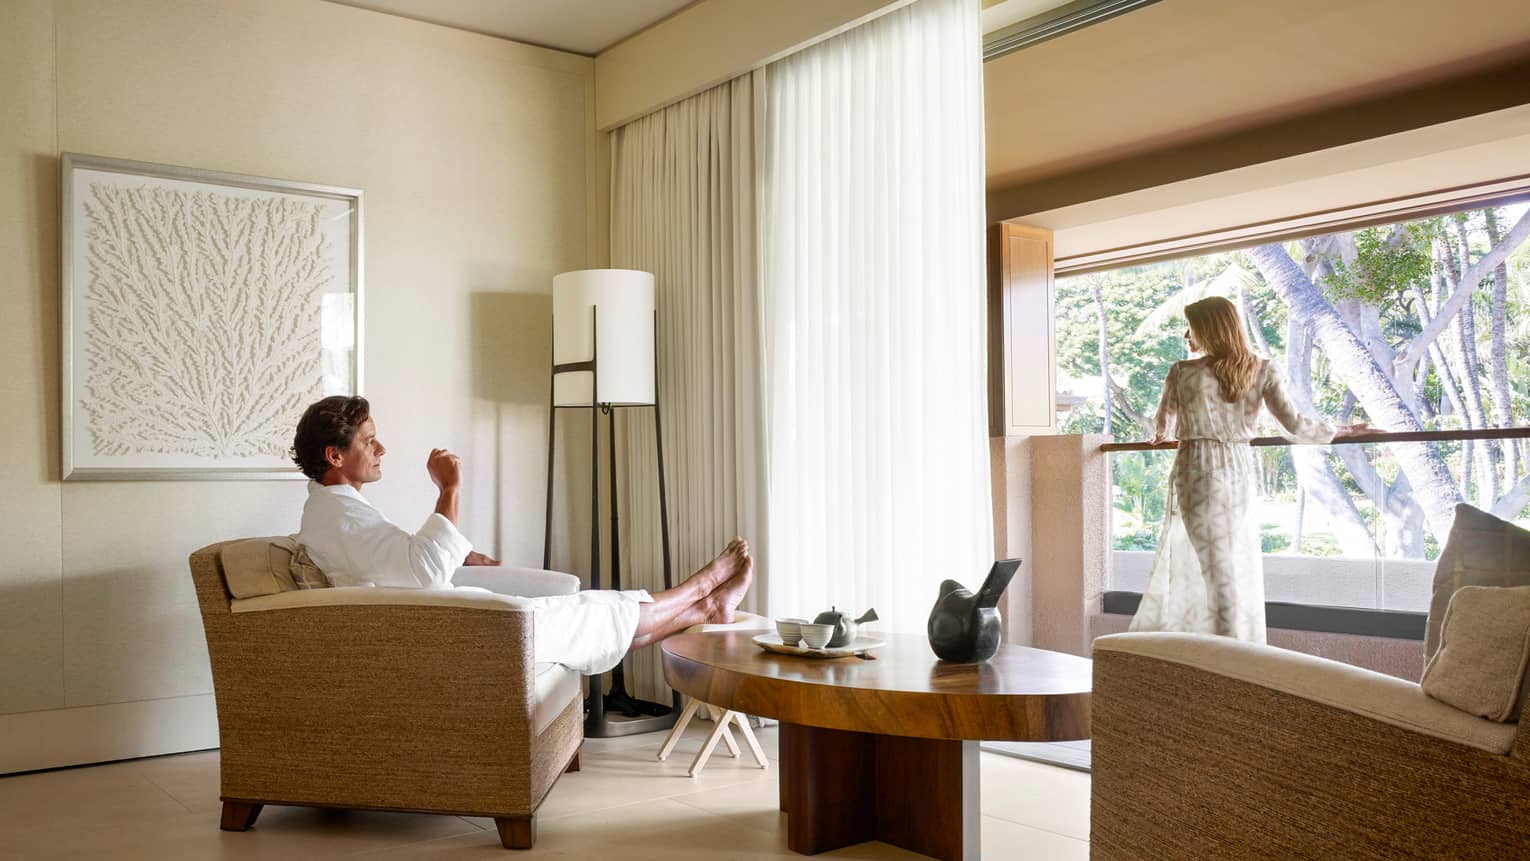 Man in white bathrobe kicks back in armchair in Spa room, woman in sheer robe stands at sunny window